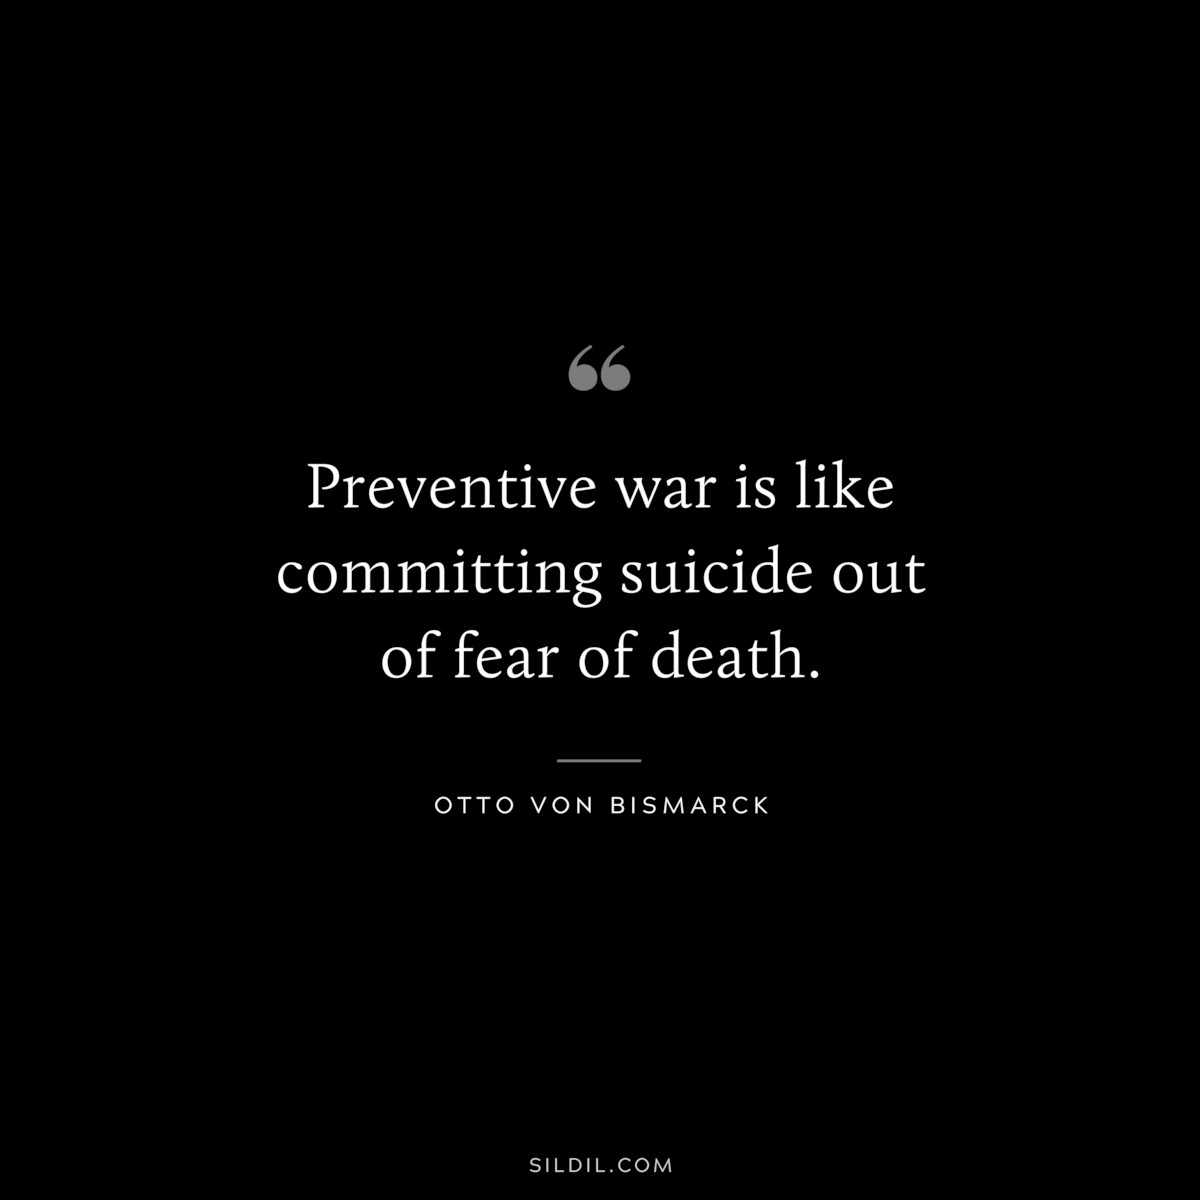 Preventive war is like committing suicide out of fear of death. ― Otto von Bismarck